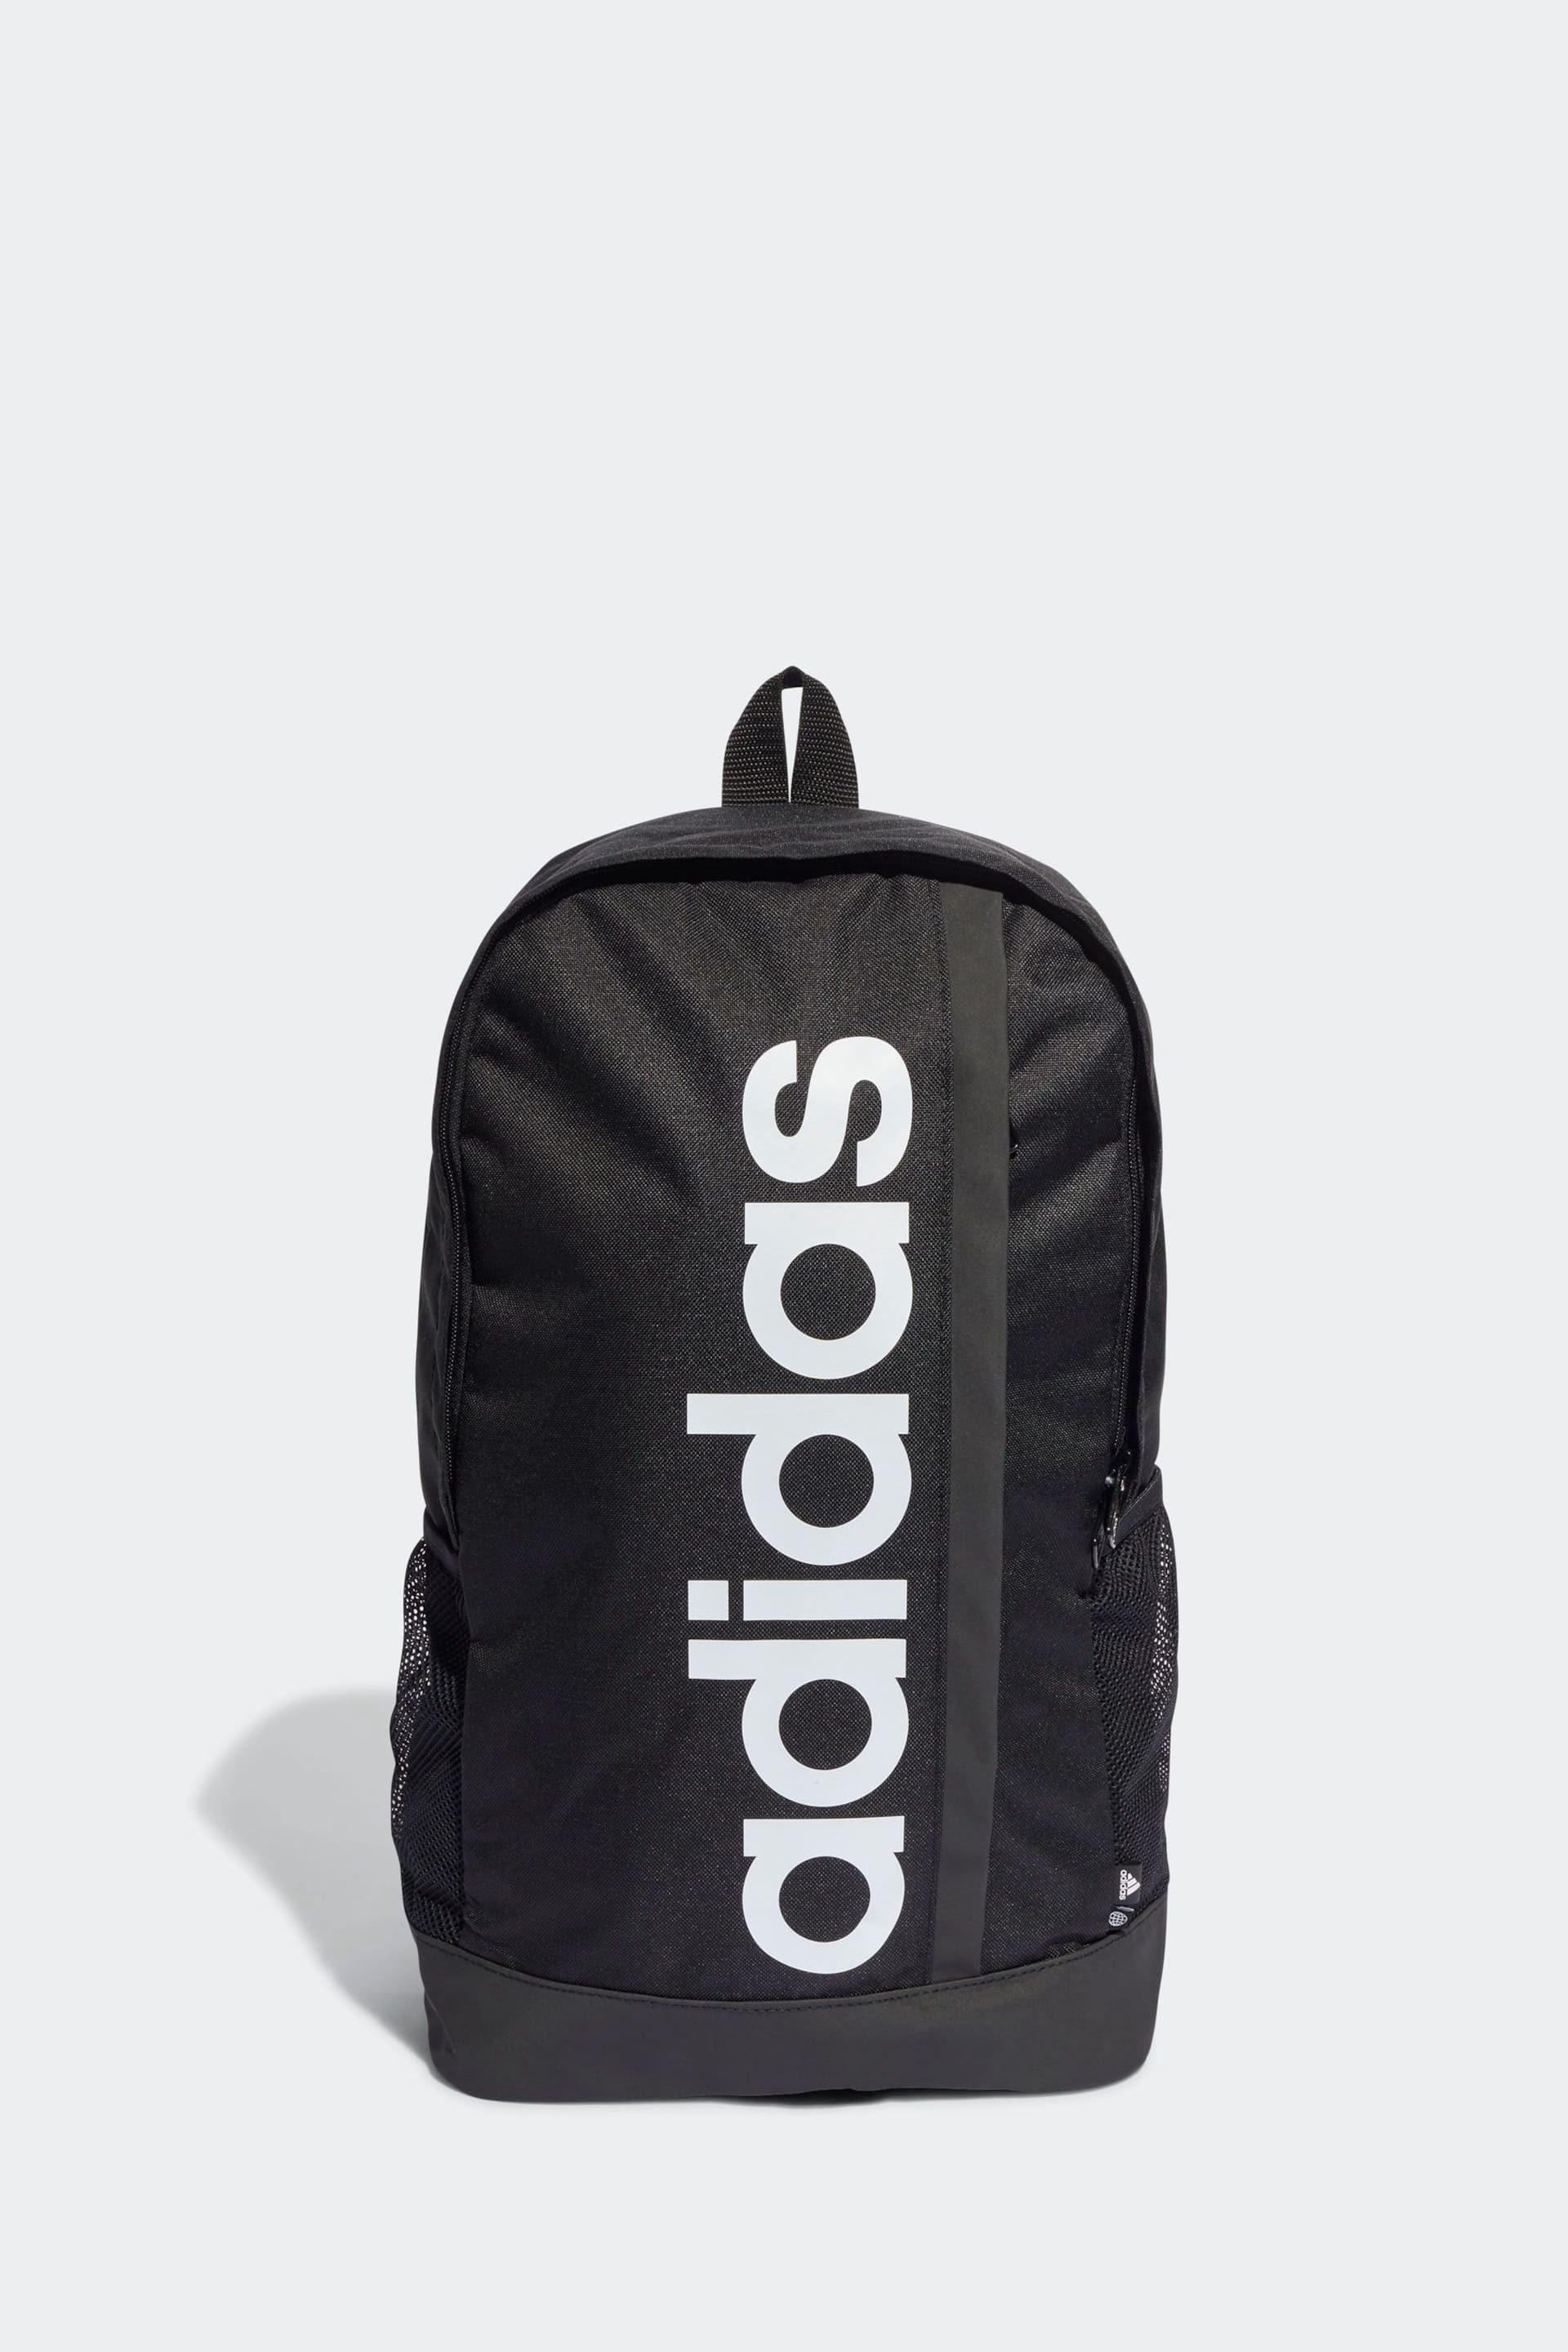 adidas Black Linear Backpack - Image 1 of 5